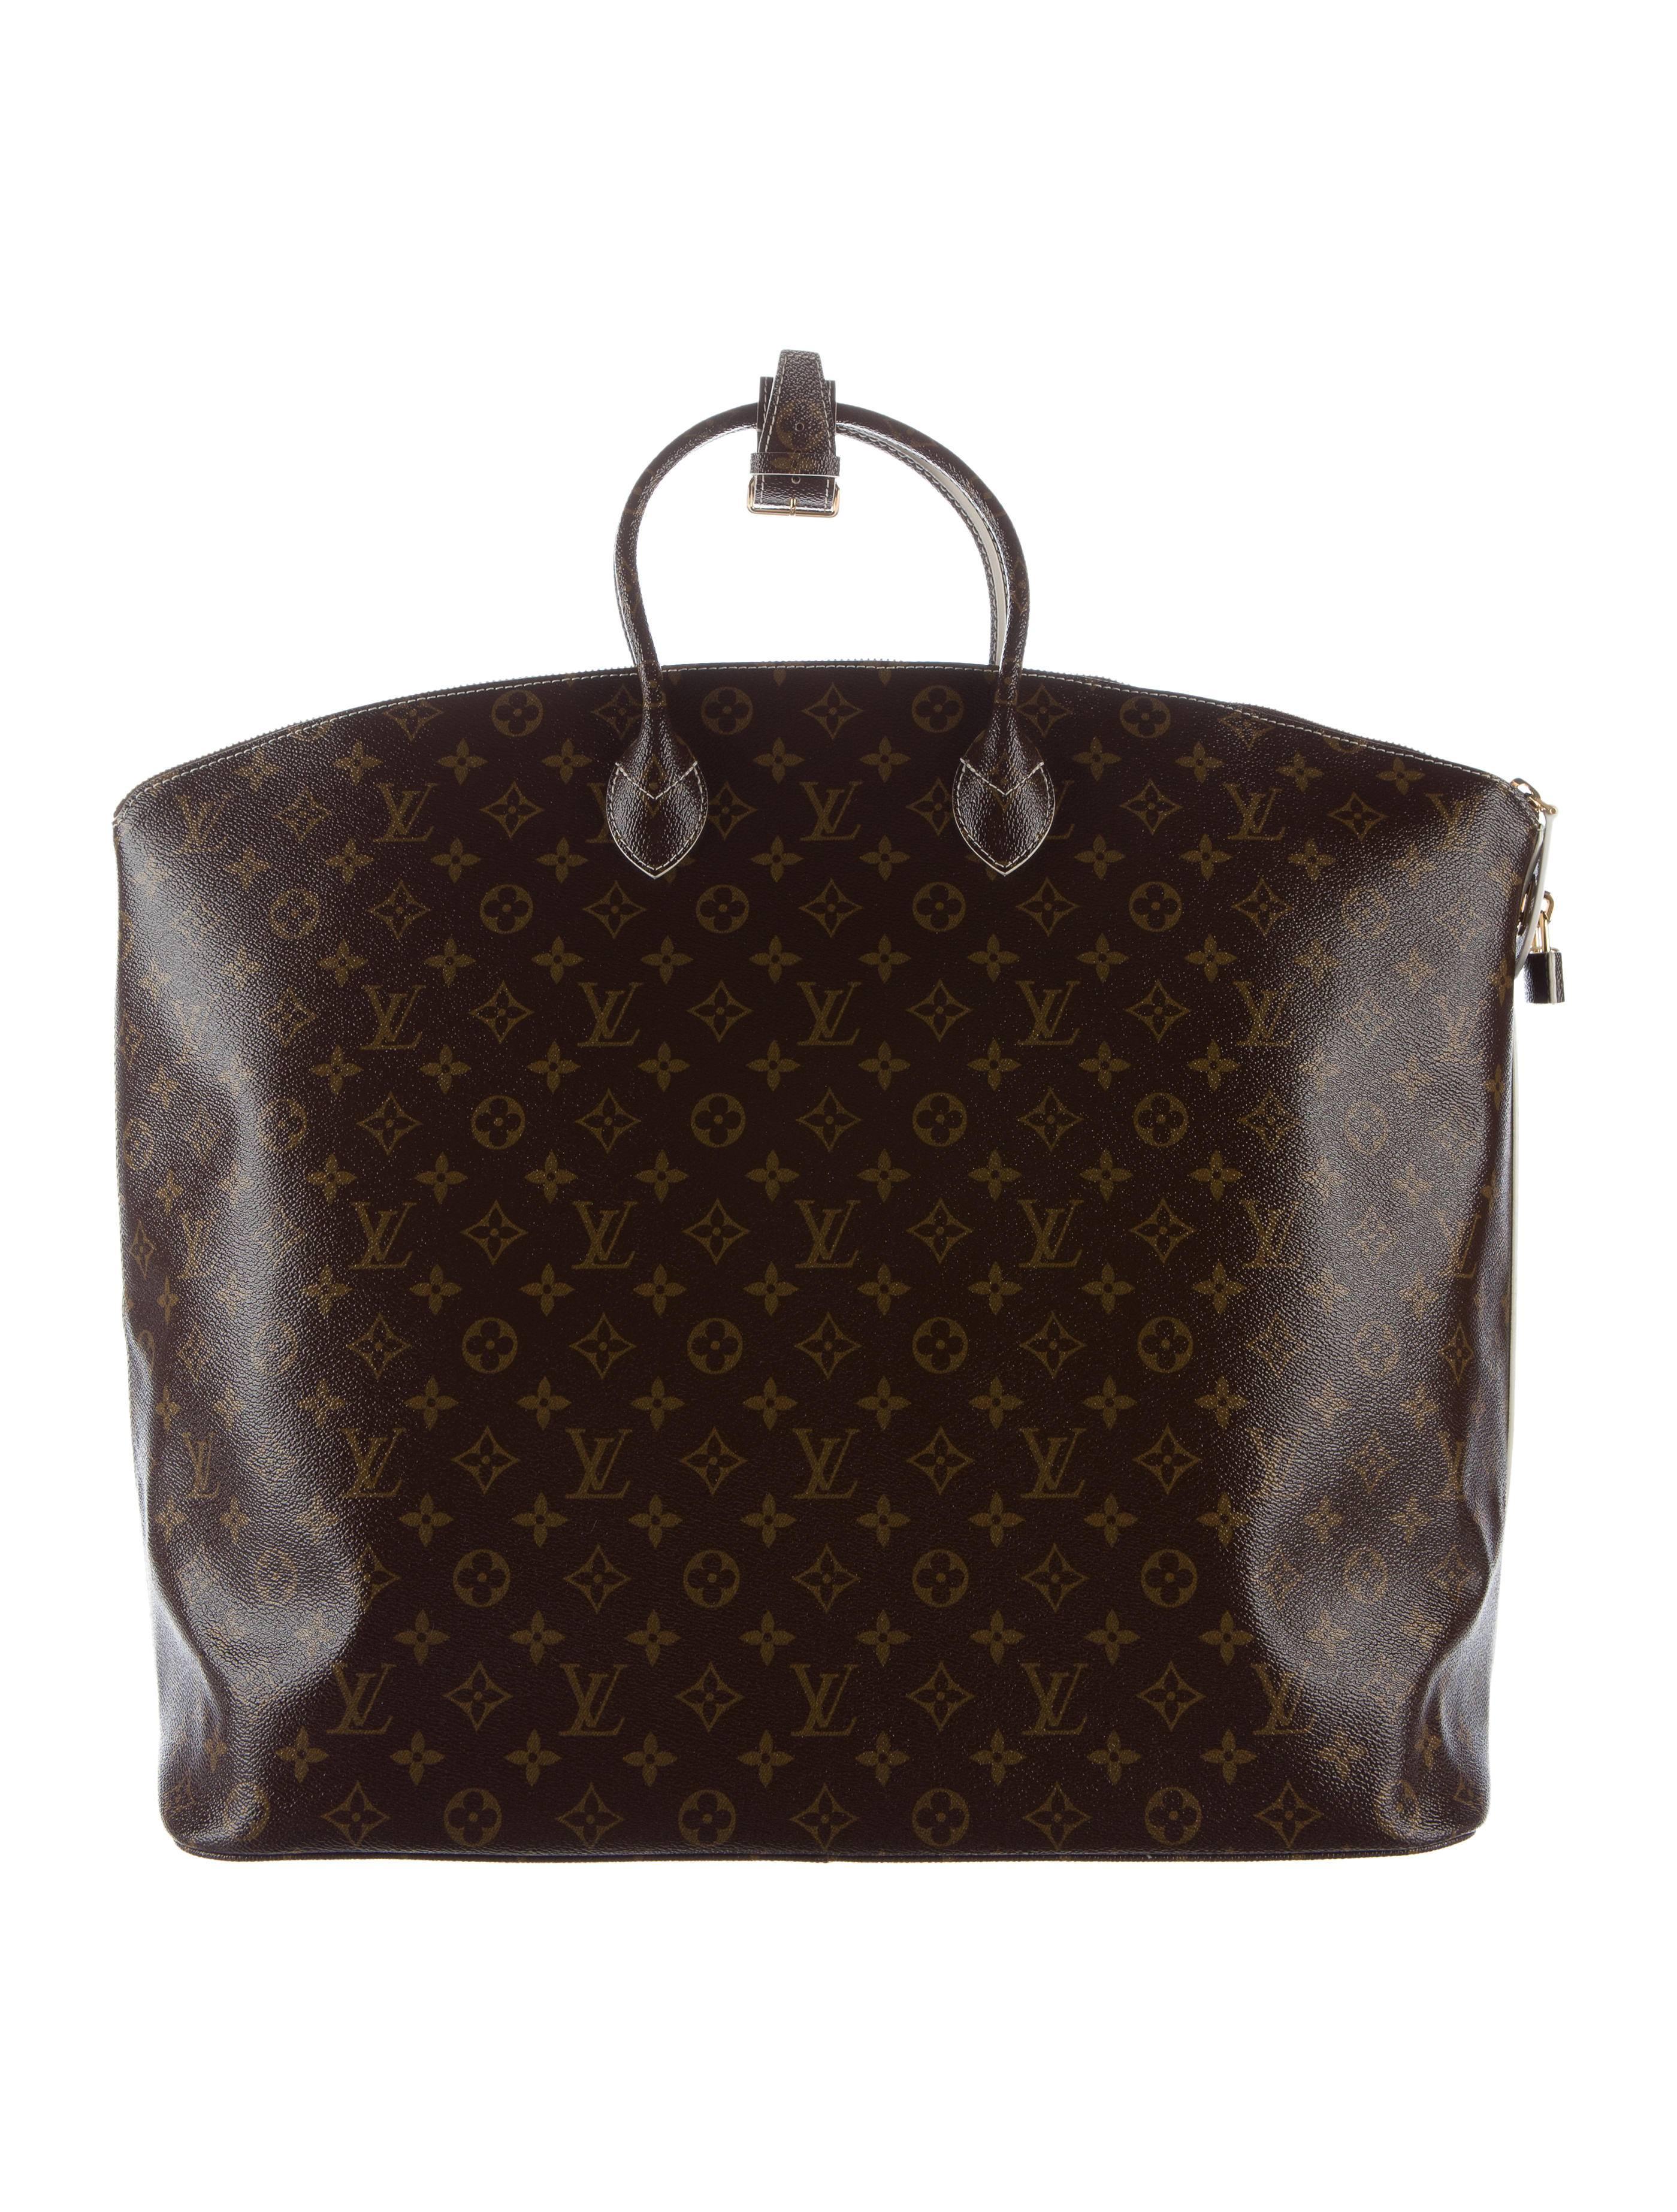 CURATOR'S NOTES

Louis Vuitton NEW NEVER USED Monogram Men's Women's Weekender Travel Tote Bag

The epitome of luxury, this Louis Vuitton carryall travel bag is brand new and includes all original Louis Vuitton accessories. 

Monogram canvas 
Brass